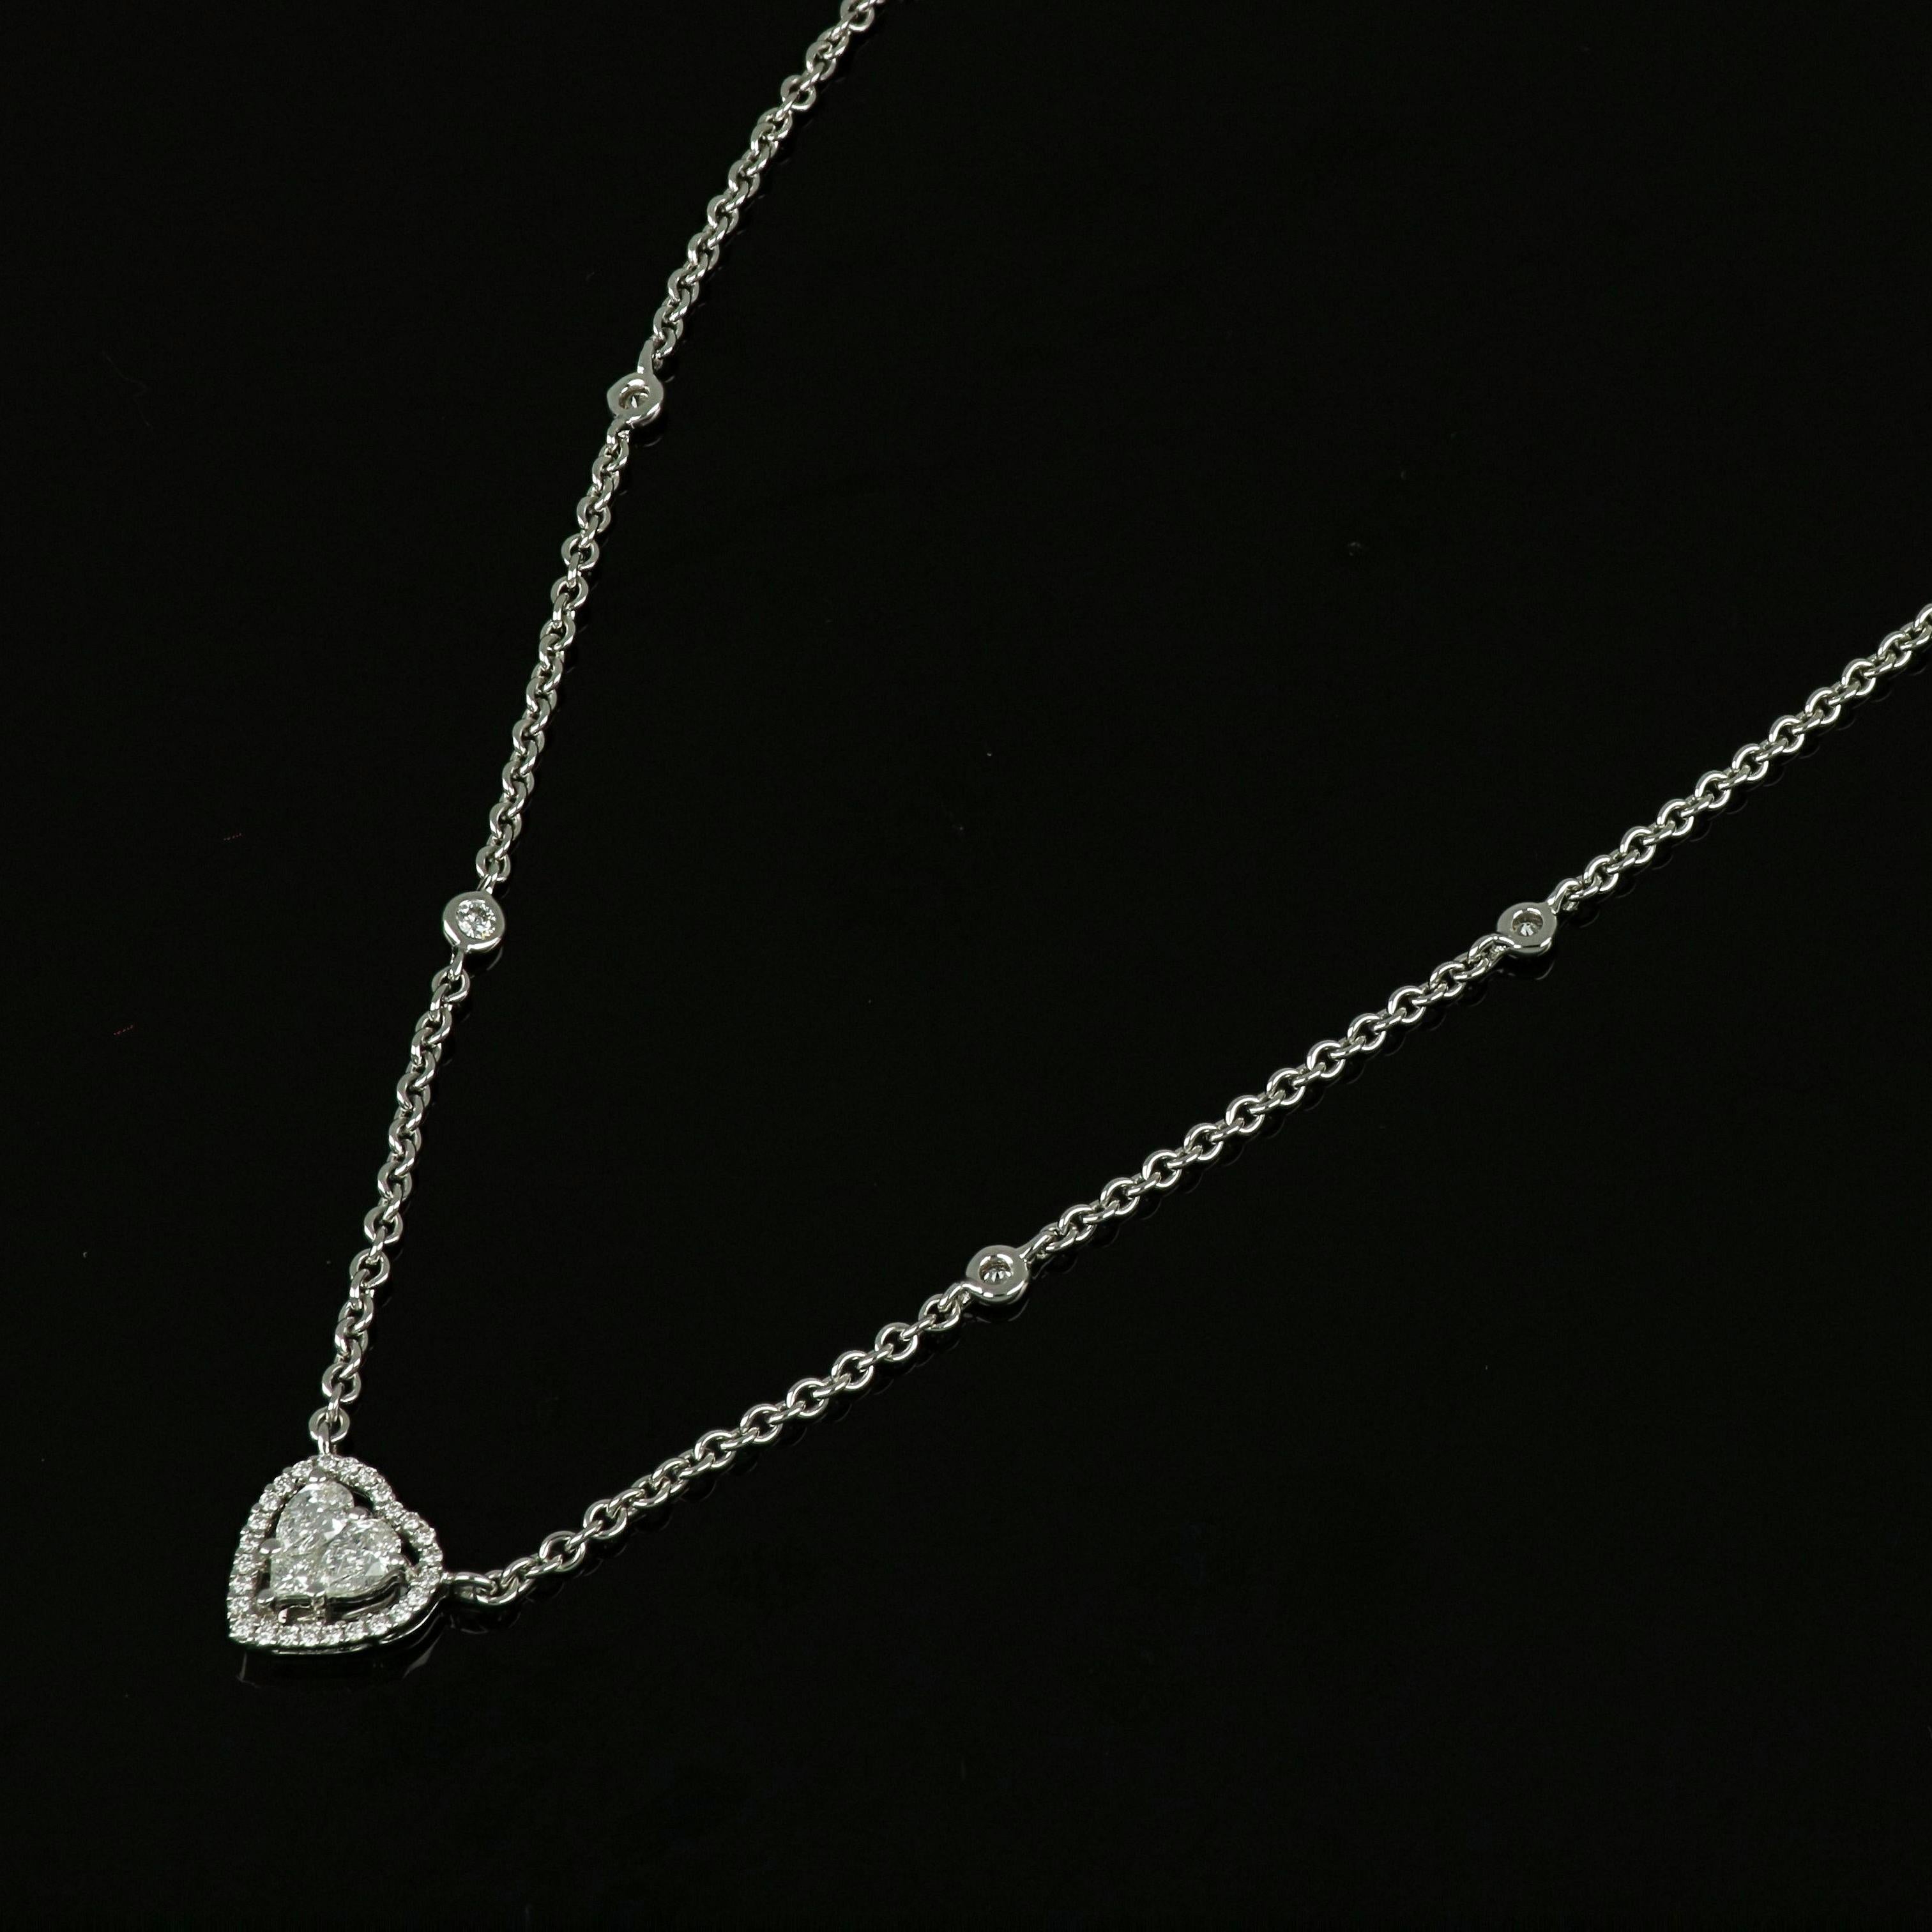 This 18 karat white gold heart shaped diamond pendant by Amwaj Jewellery showcases a simple yet outstanding setting for one of the most charming and romantic diamond cuts. Framed by an array of round diamonds, and sleekly suspended on a fine white